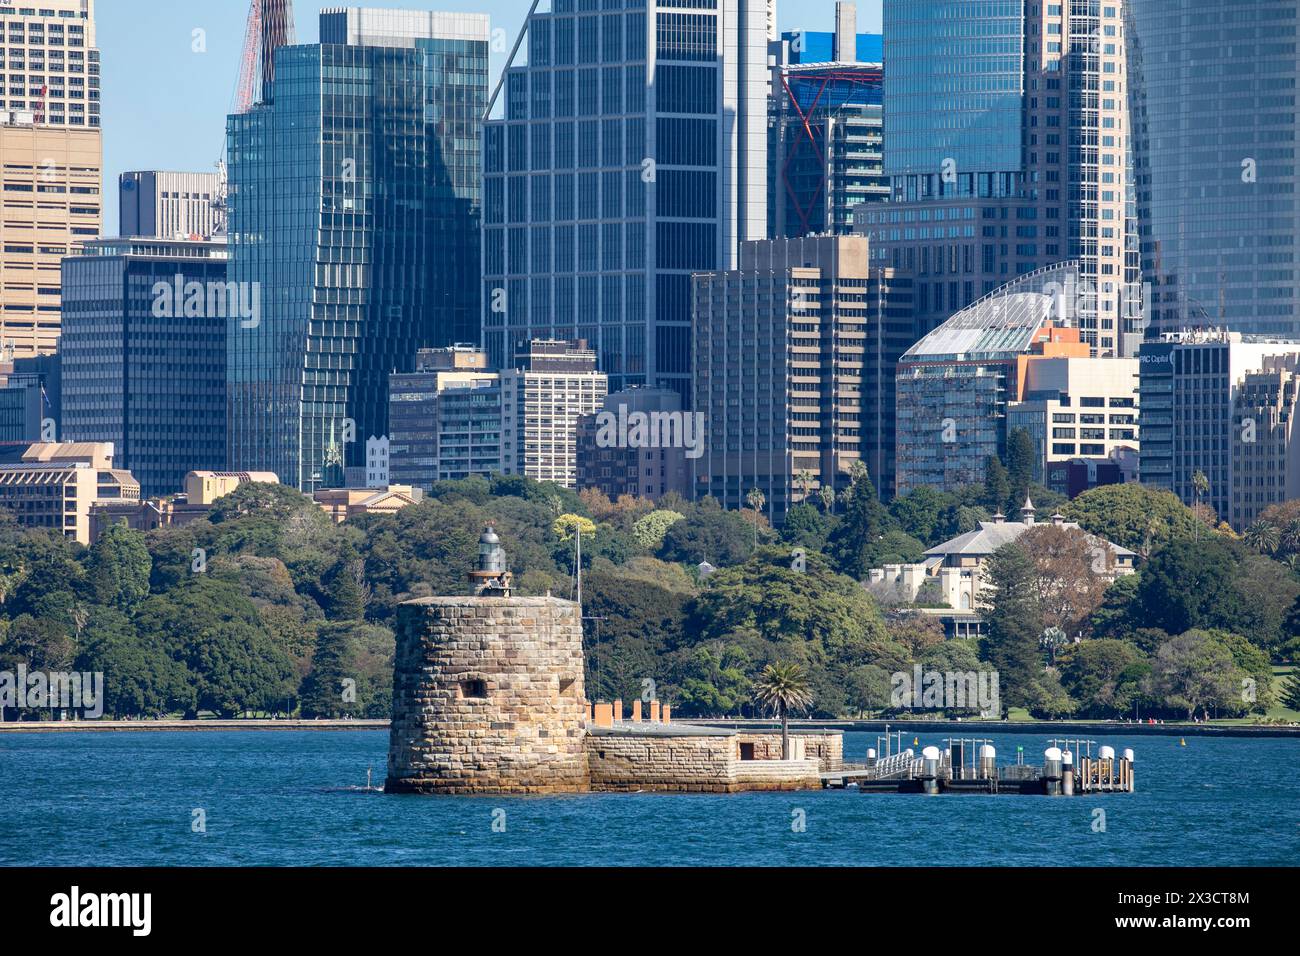 Fort Denison, former penal site is a heritage listed island in Sydney Harbour national park, it also served as a defence facility,Sydney CBD Stock Photo